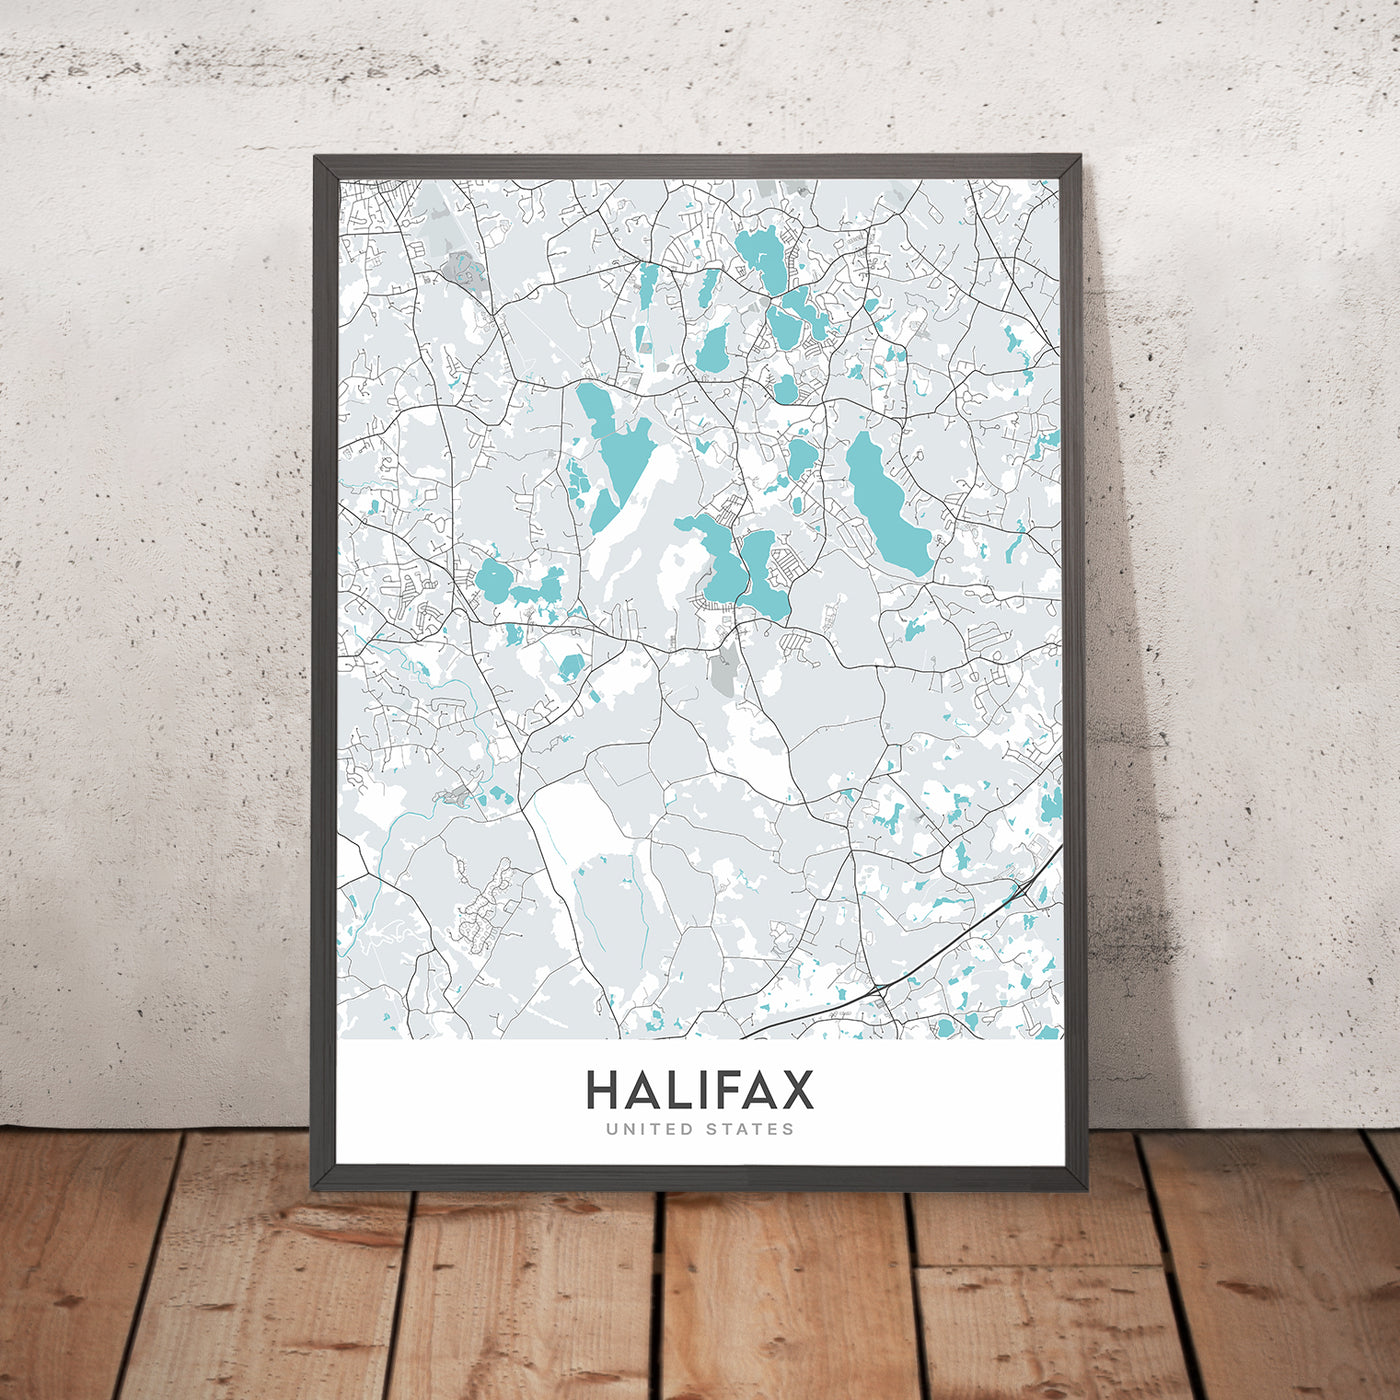 Moderner Stadtplan von Halifax, MA: Halifax Citadel National Historic Site, Point Pleasant Park, Peggy's Cove, The Old Town Clock, Province House